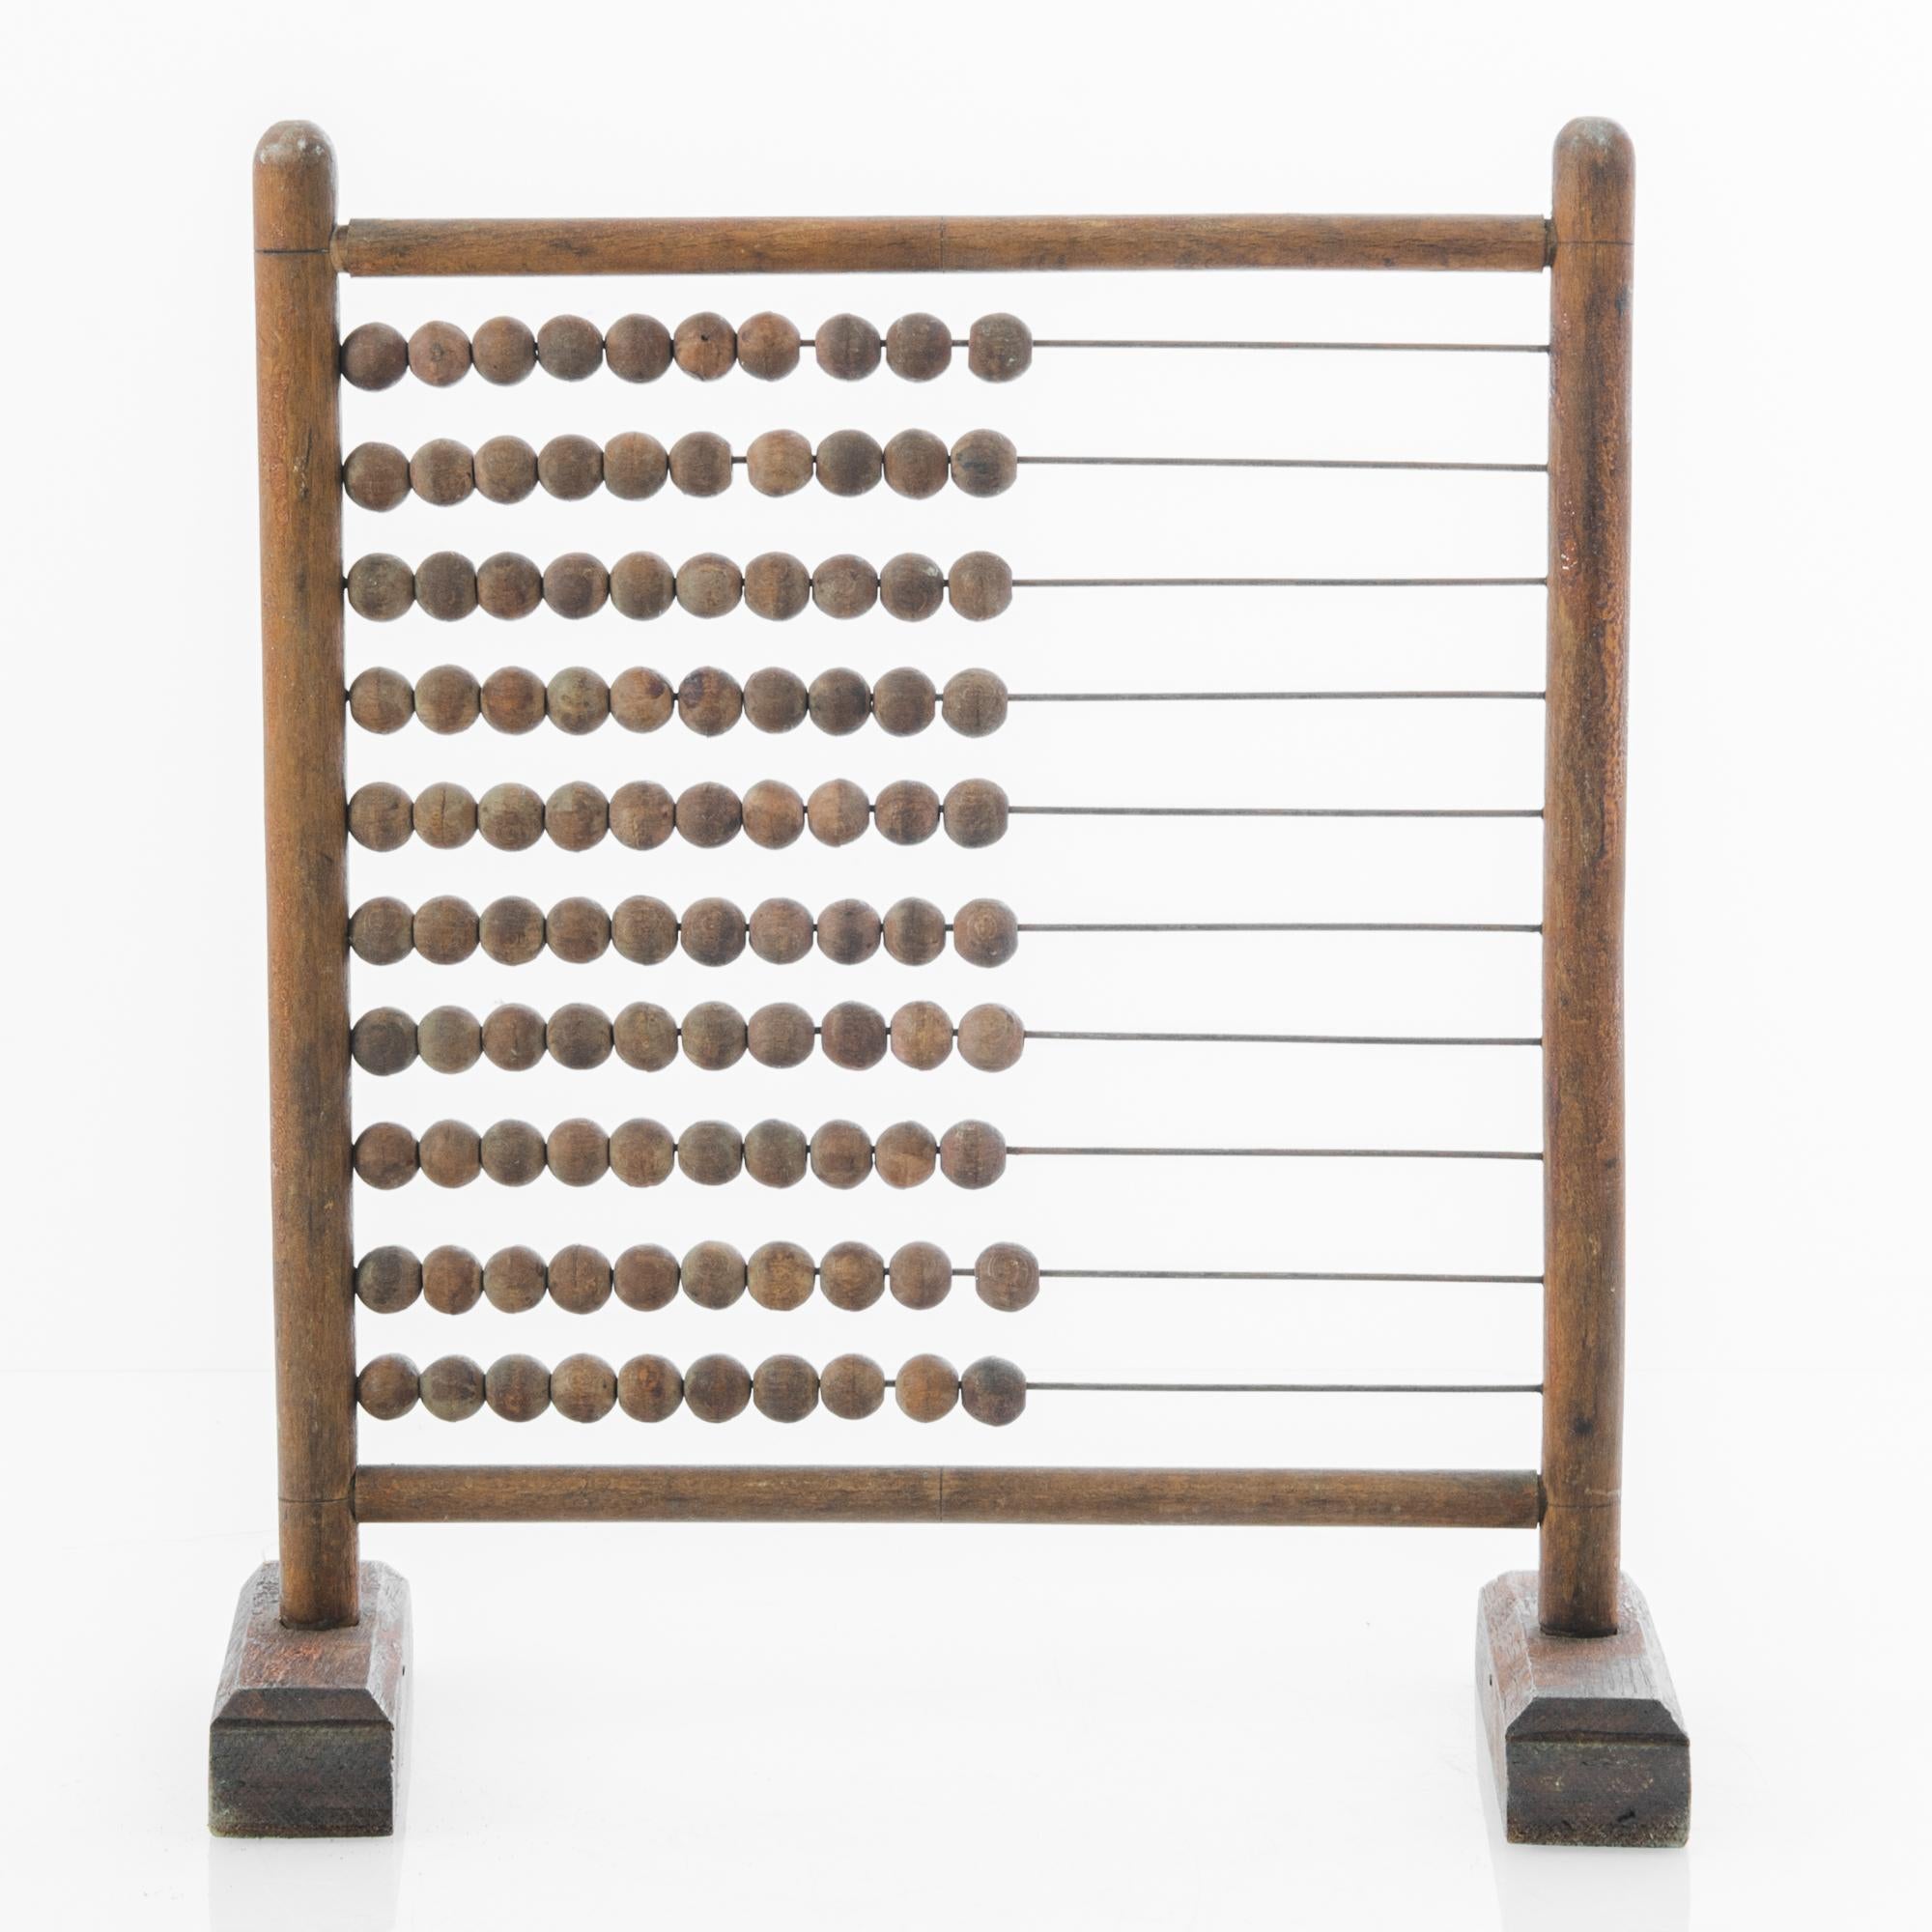 A wood and metal abacus from France circa 1900. This antique counting device captivates with its wayward charm, a curious remembrance from another era.